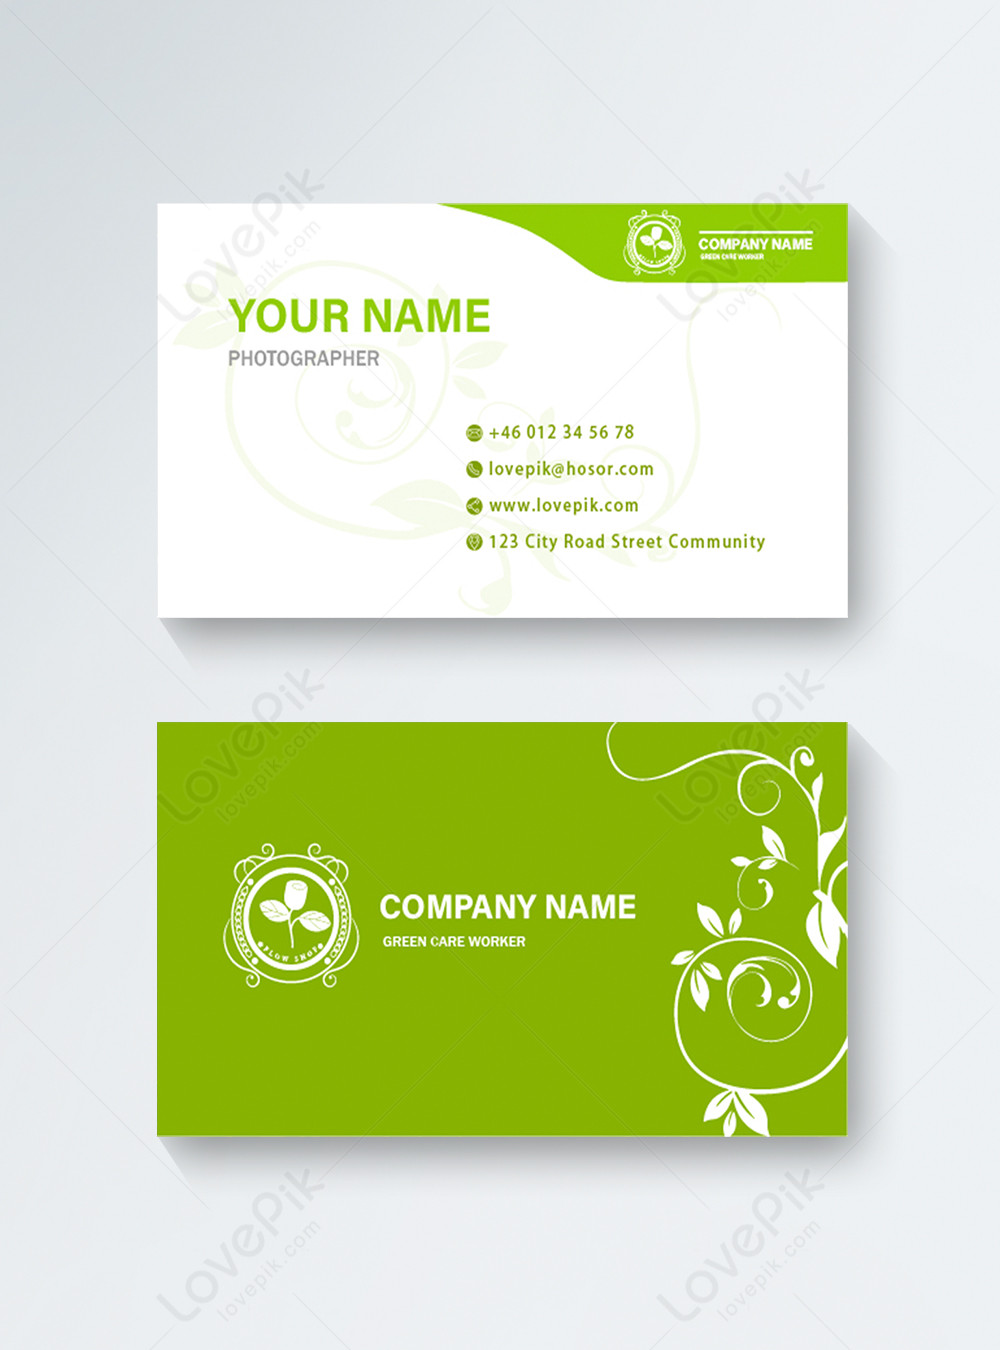 Green lawn care business card template image_picture free download In Lawn Care Business Cards Templates Free